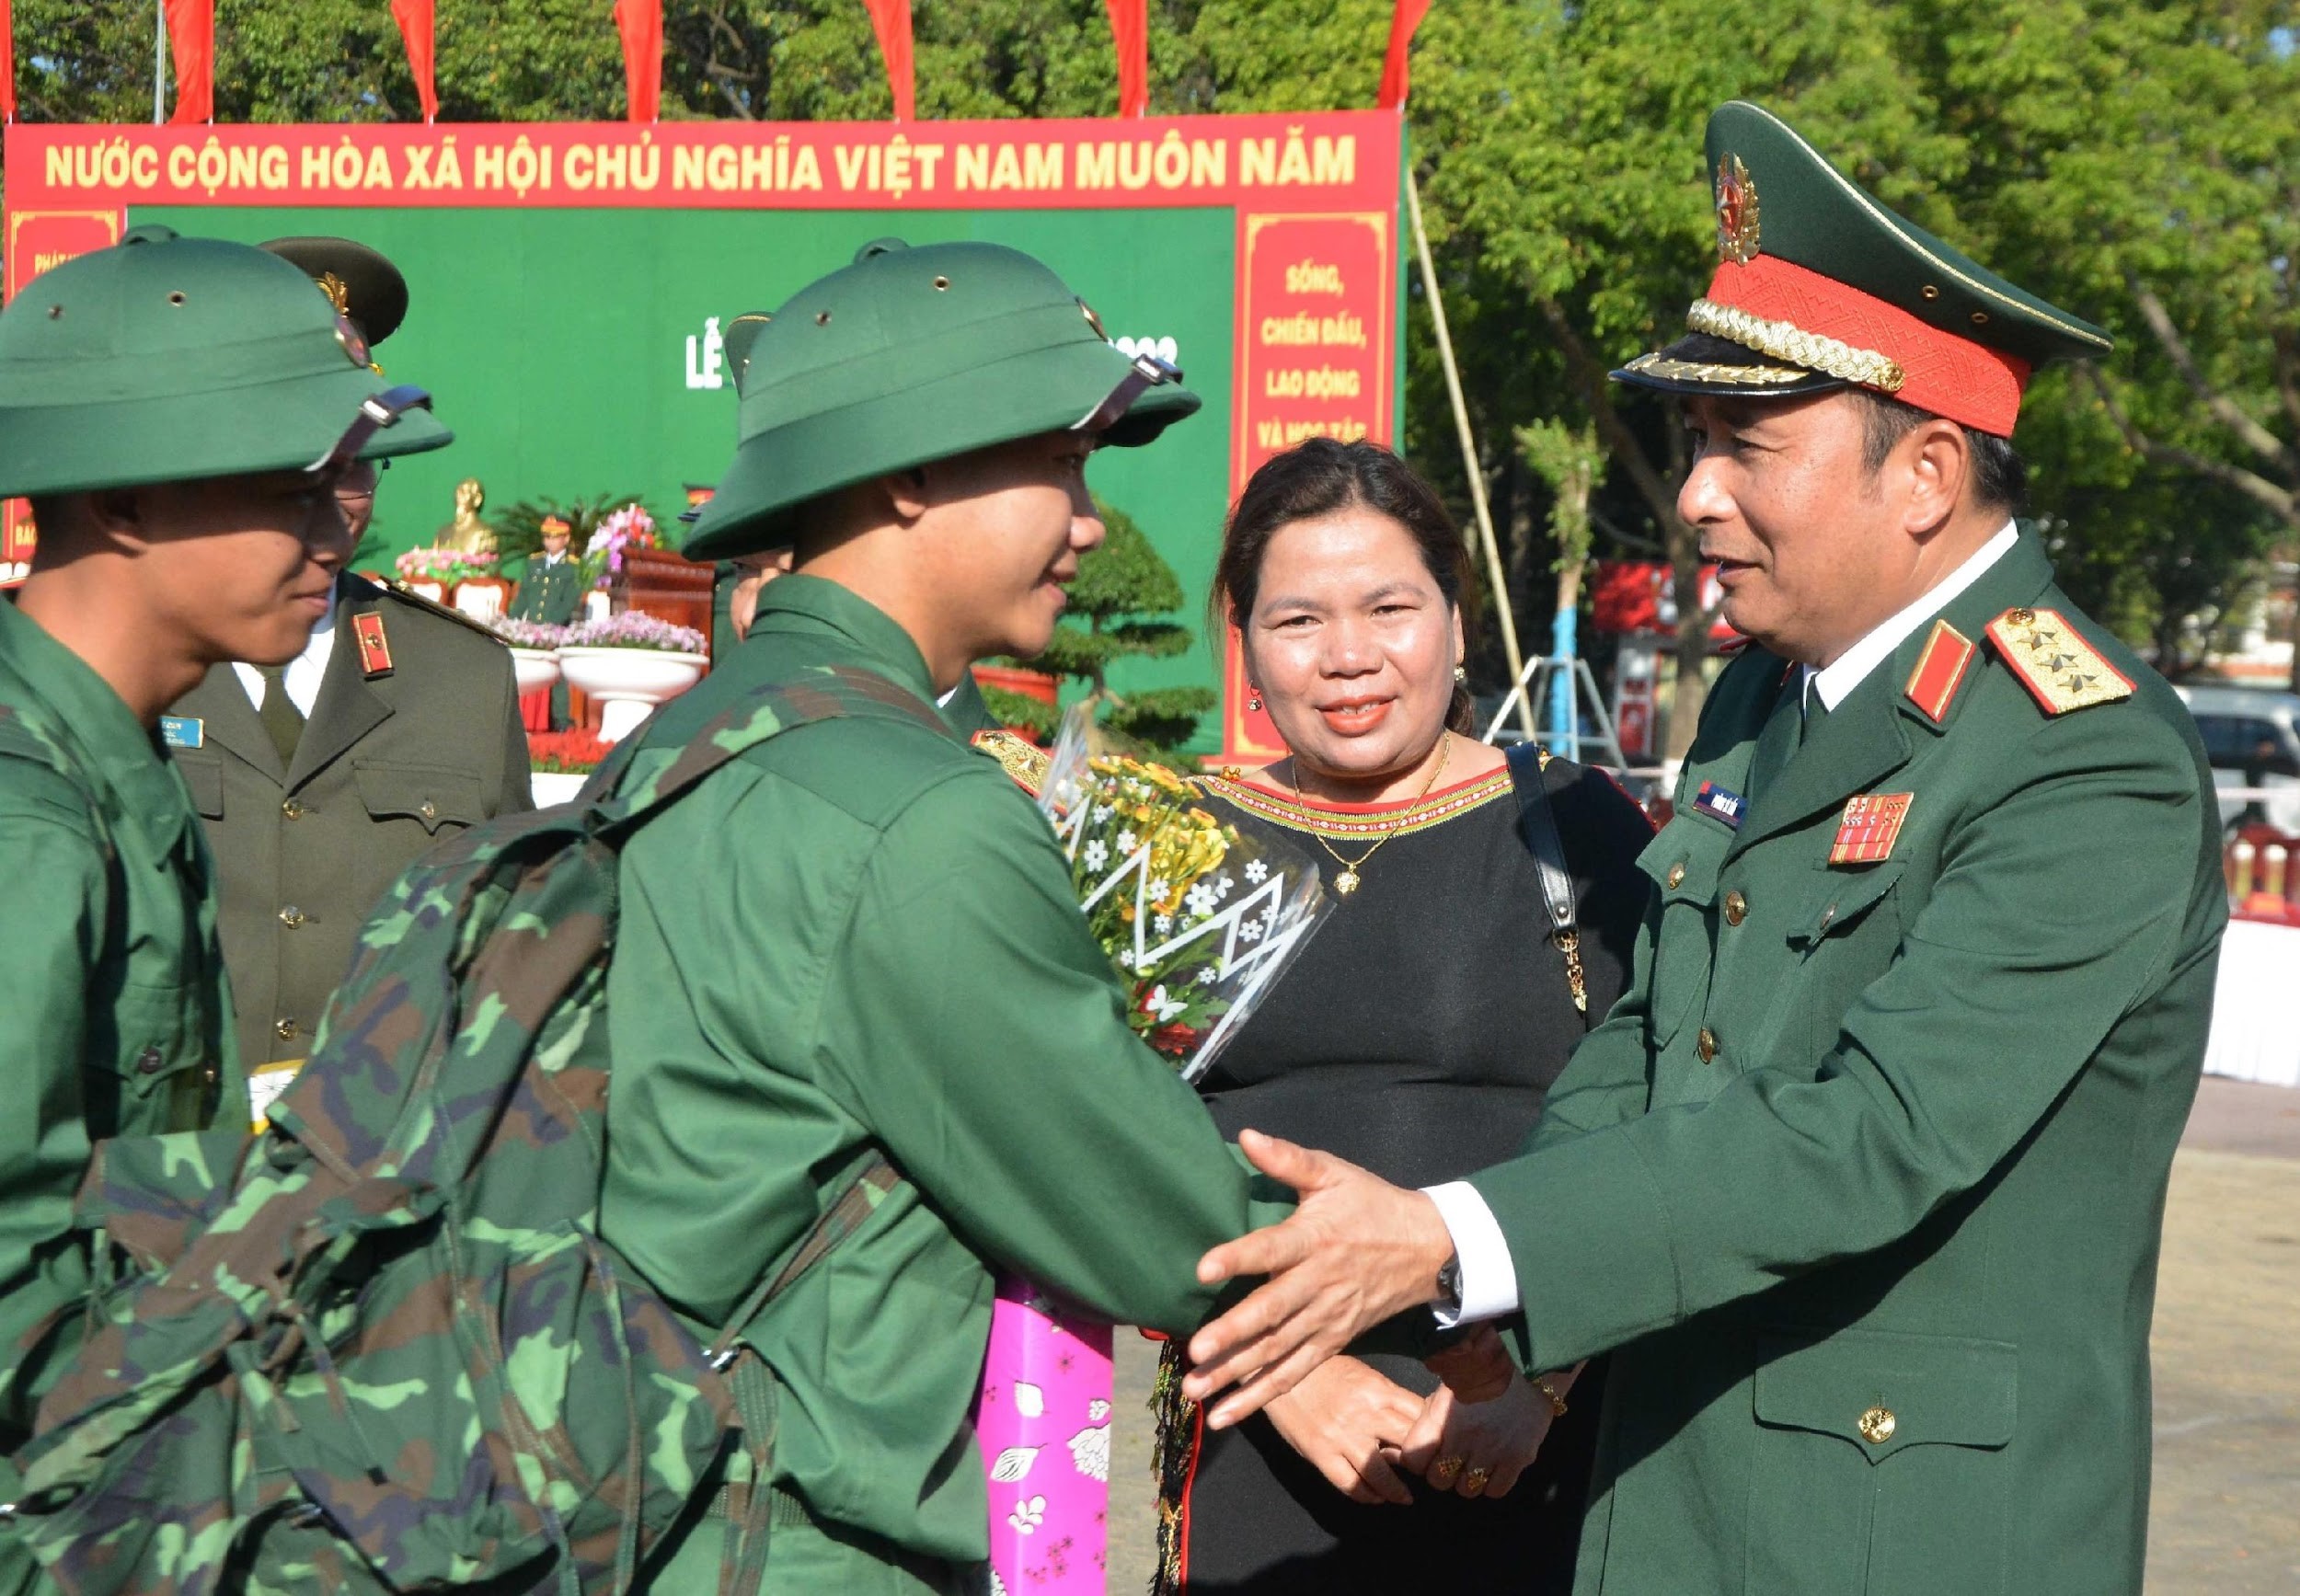 Young people of Buon Ma Thuot eager to enlist in the army